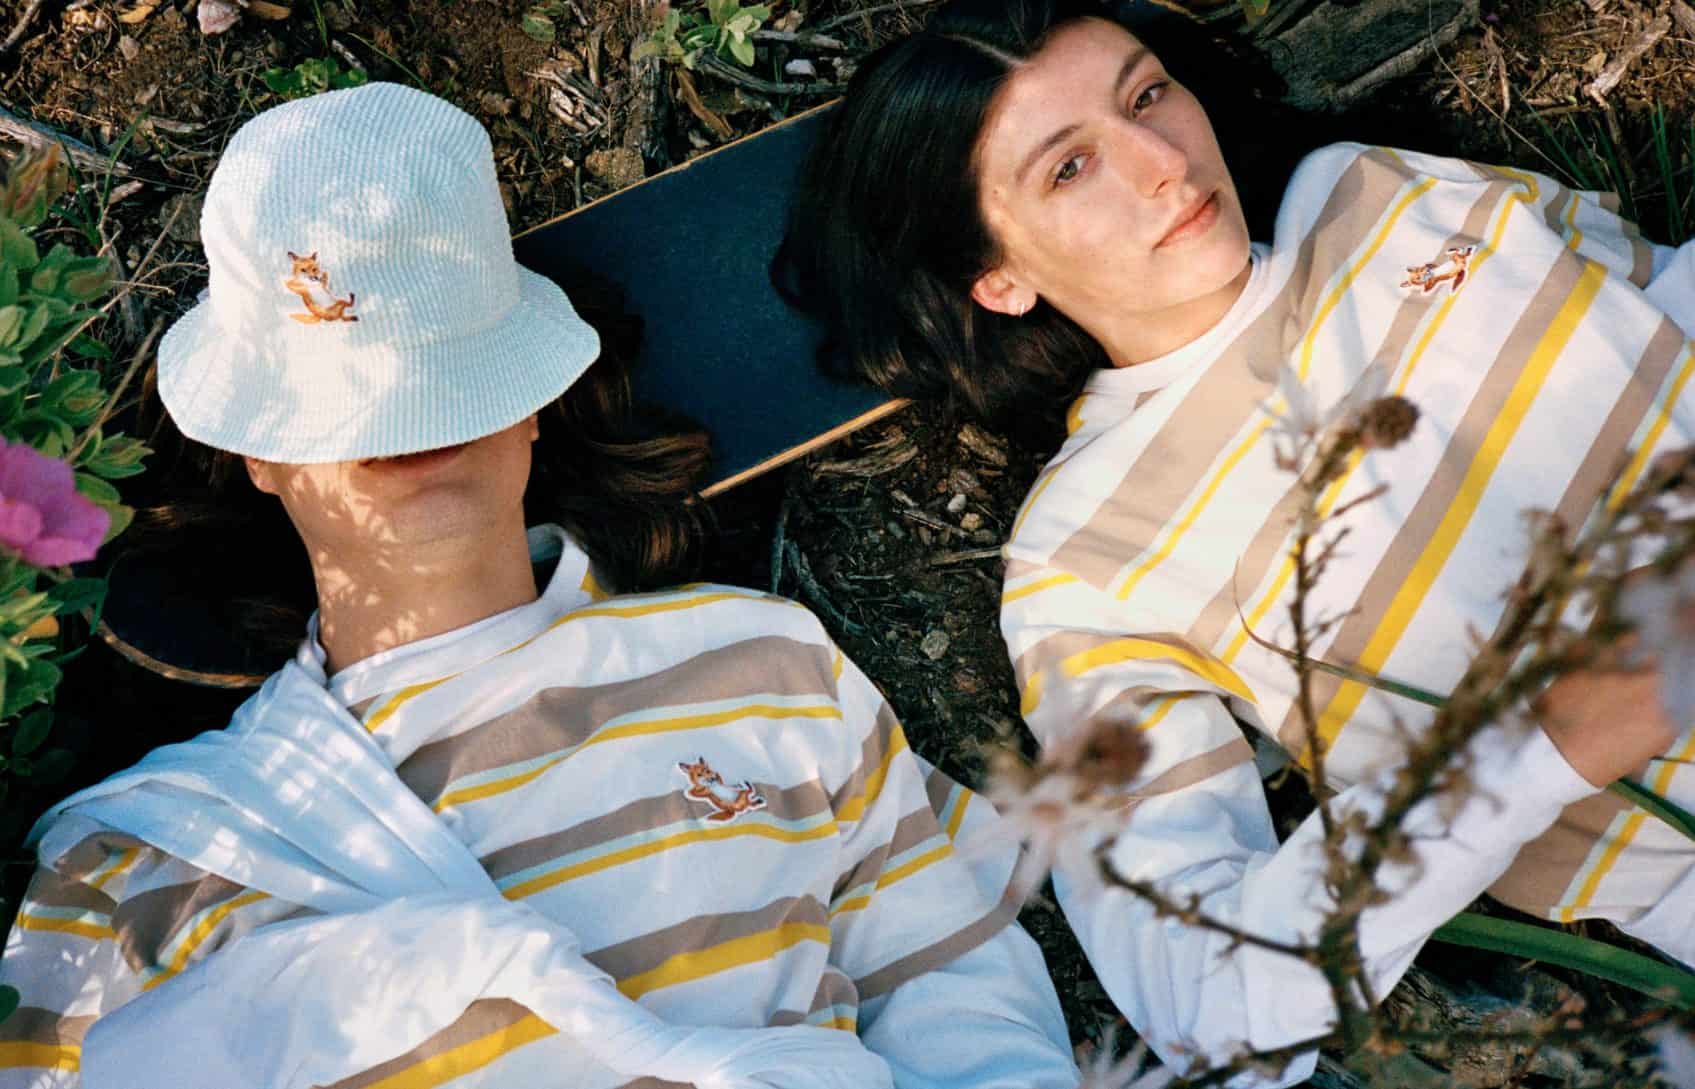 MAISON KITSUNÉ TAKES US ON A SUMMER GETAWAY IN NEWEST COLLECTION